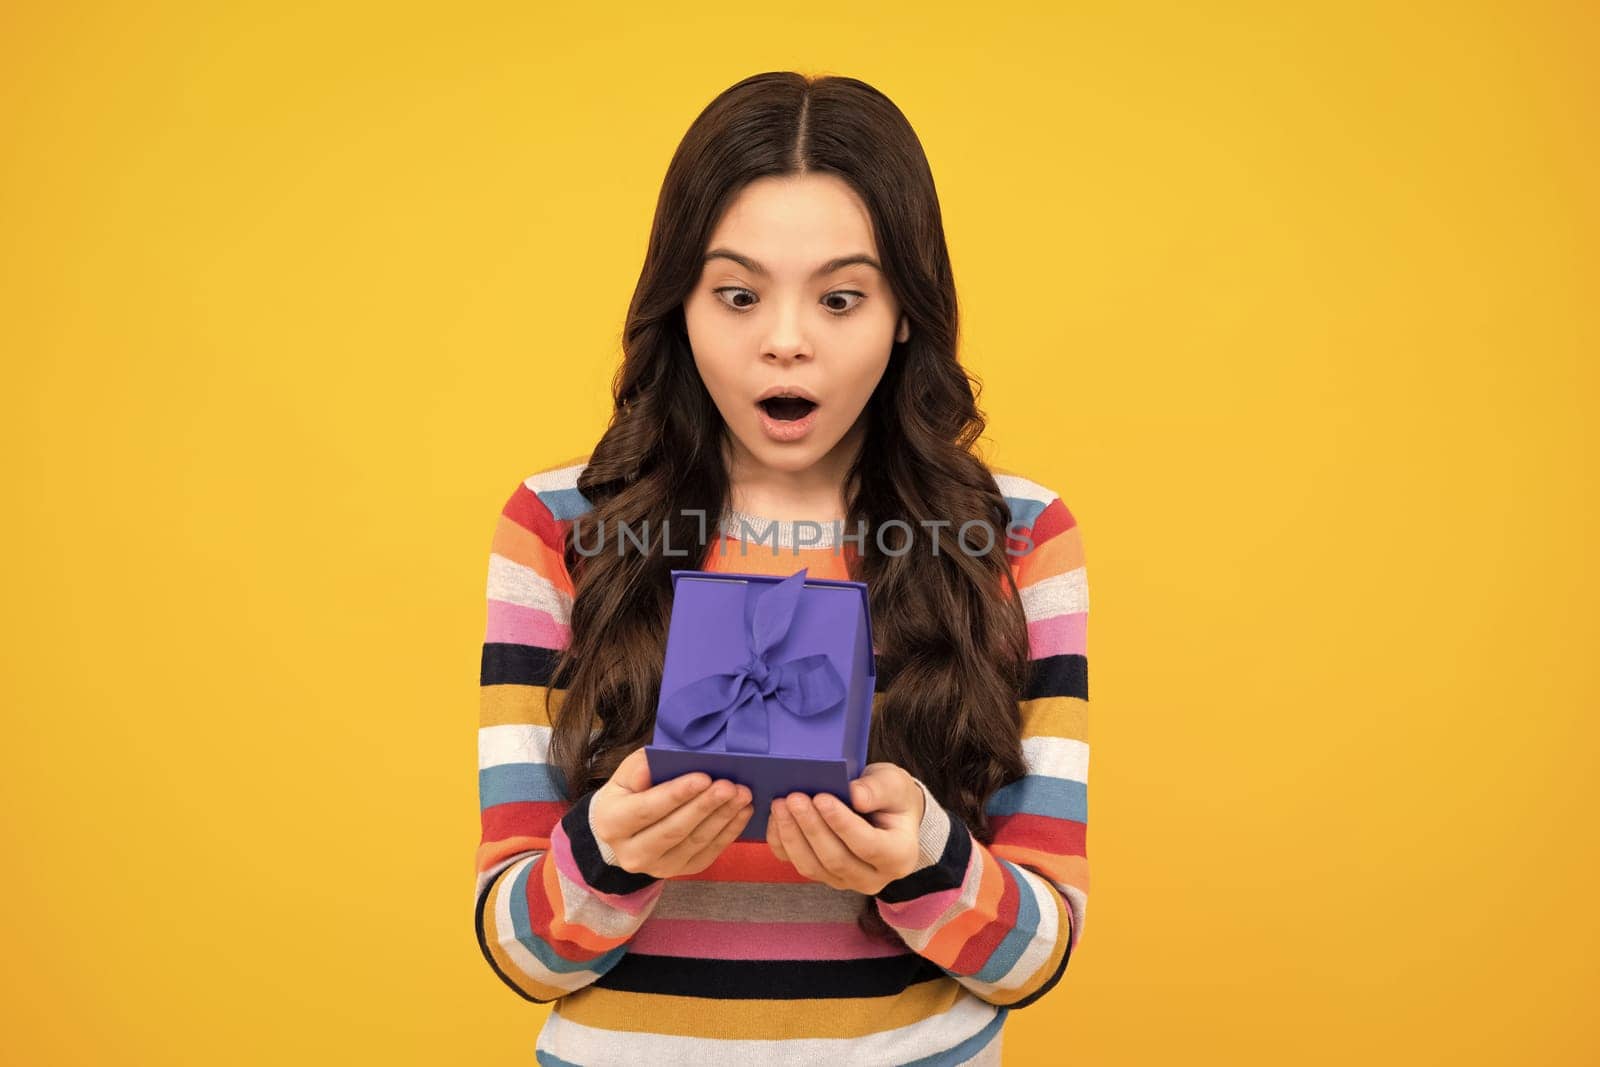 Shocked amazed face, surprised emotions of young teenager girl. Teenager kid with present box. Teen girl giving birthday gift. Present, greeting and gifting concept